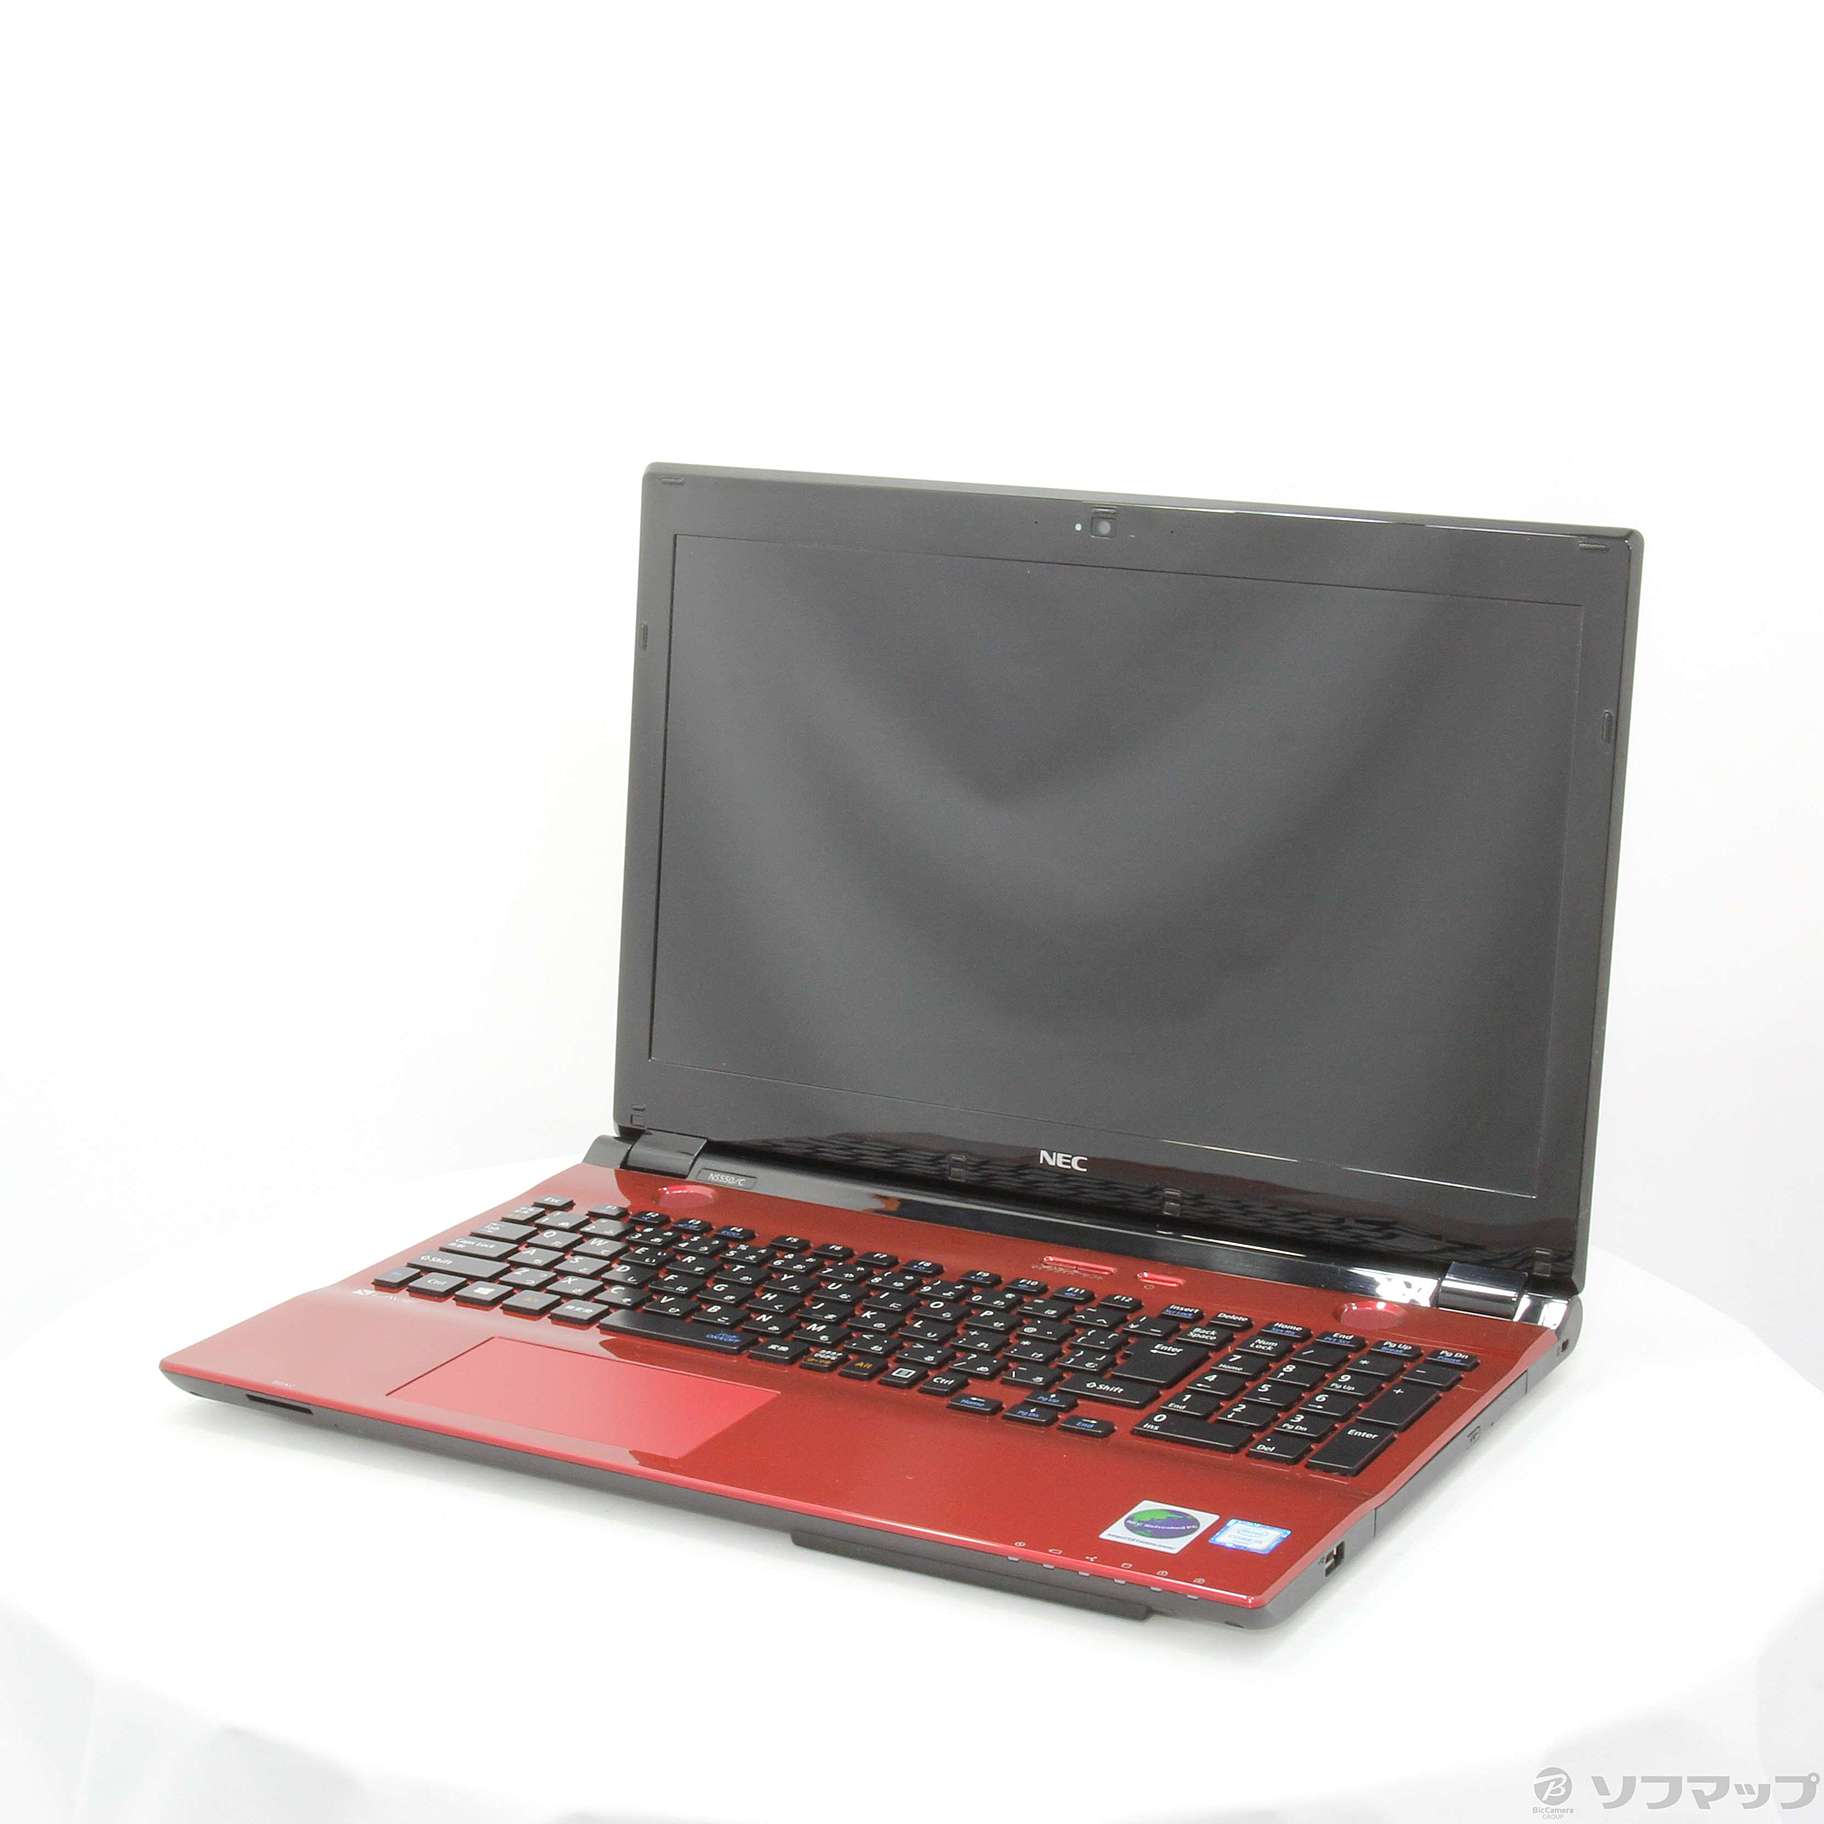 LaVie Note Standard PC-NS550CAR クリスタルレッド 〔NEC Refreshed PC〕 〔Windows 10〕  ≪メーカー保証あり≫